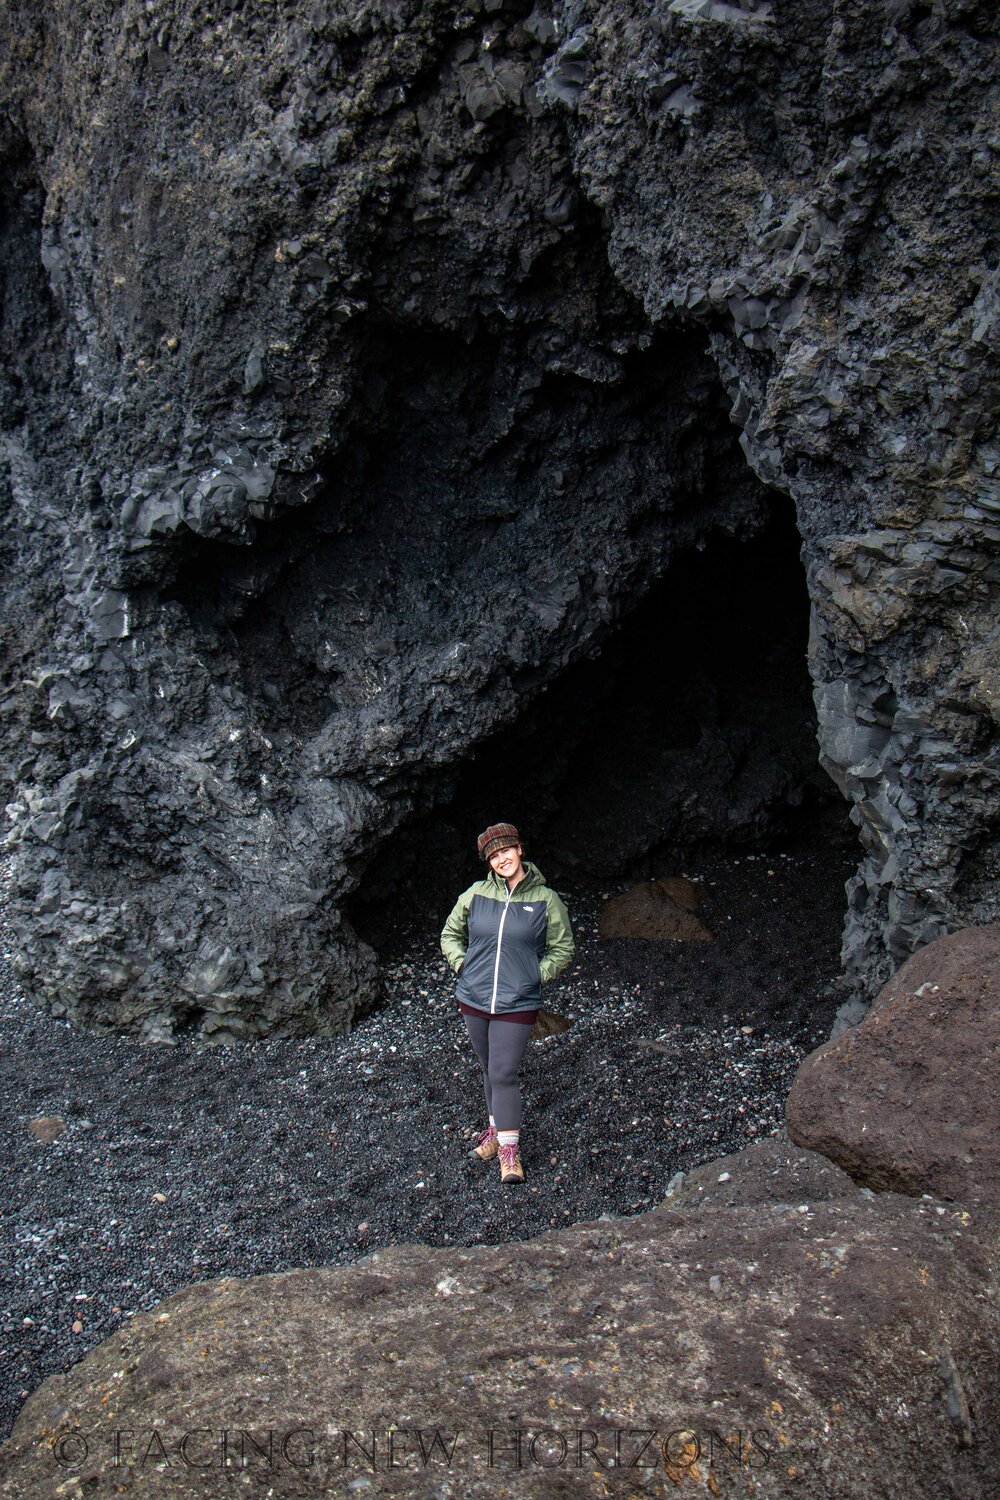  Dark caves at Reynisfjara. Are there trolls in here? 